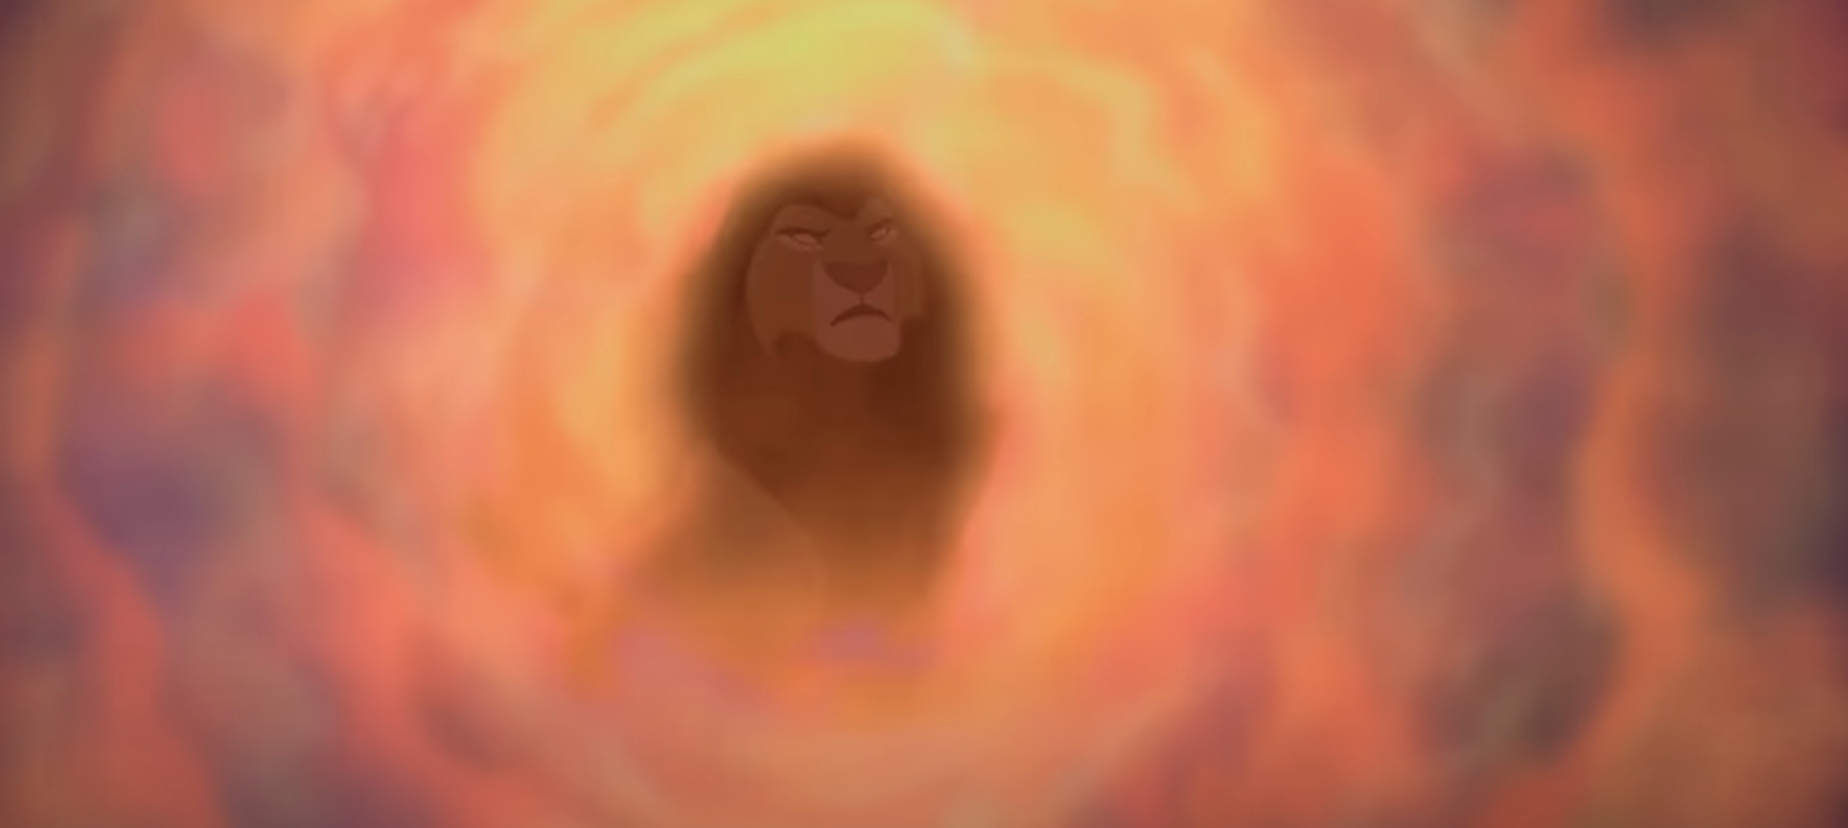 Mufasa&#x27;s face appears in a swirling cloud formation